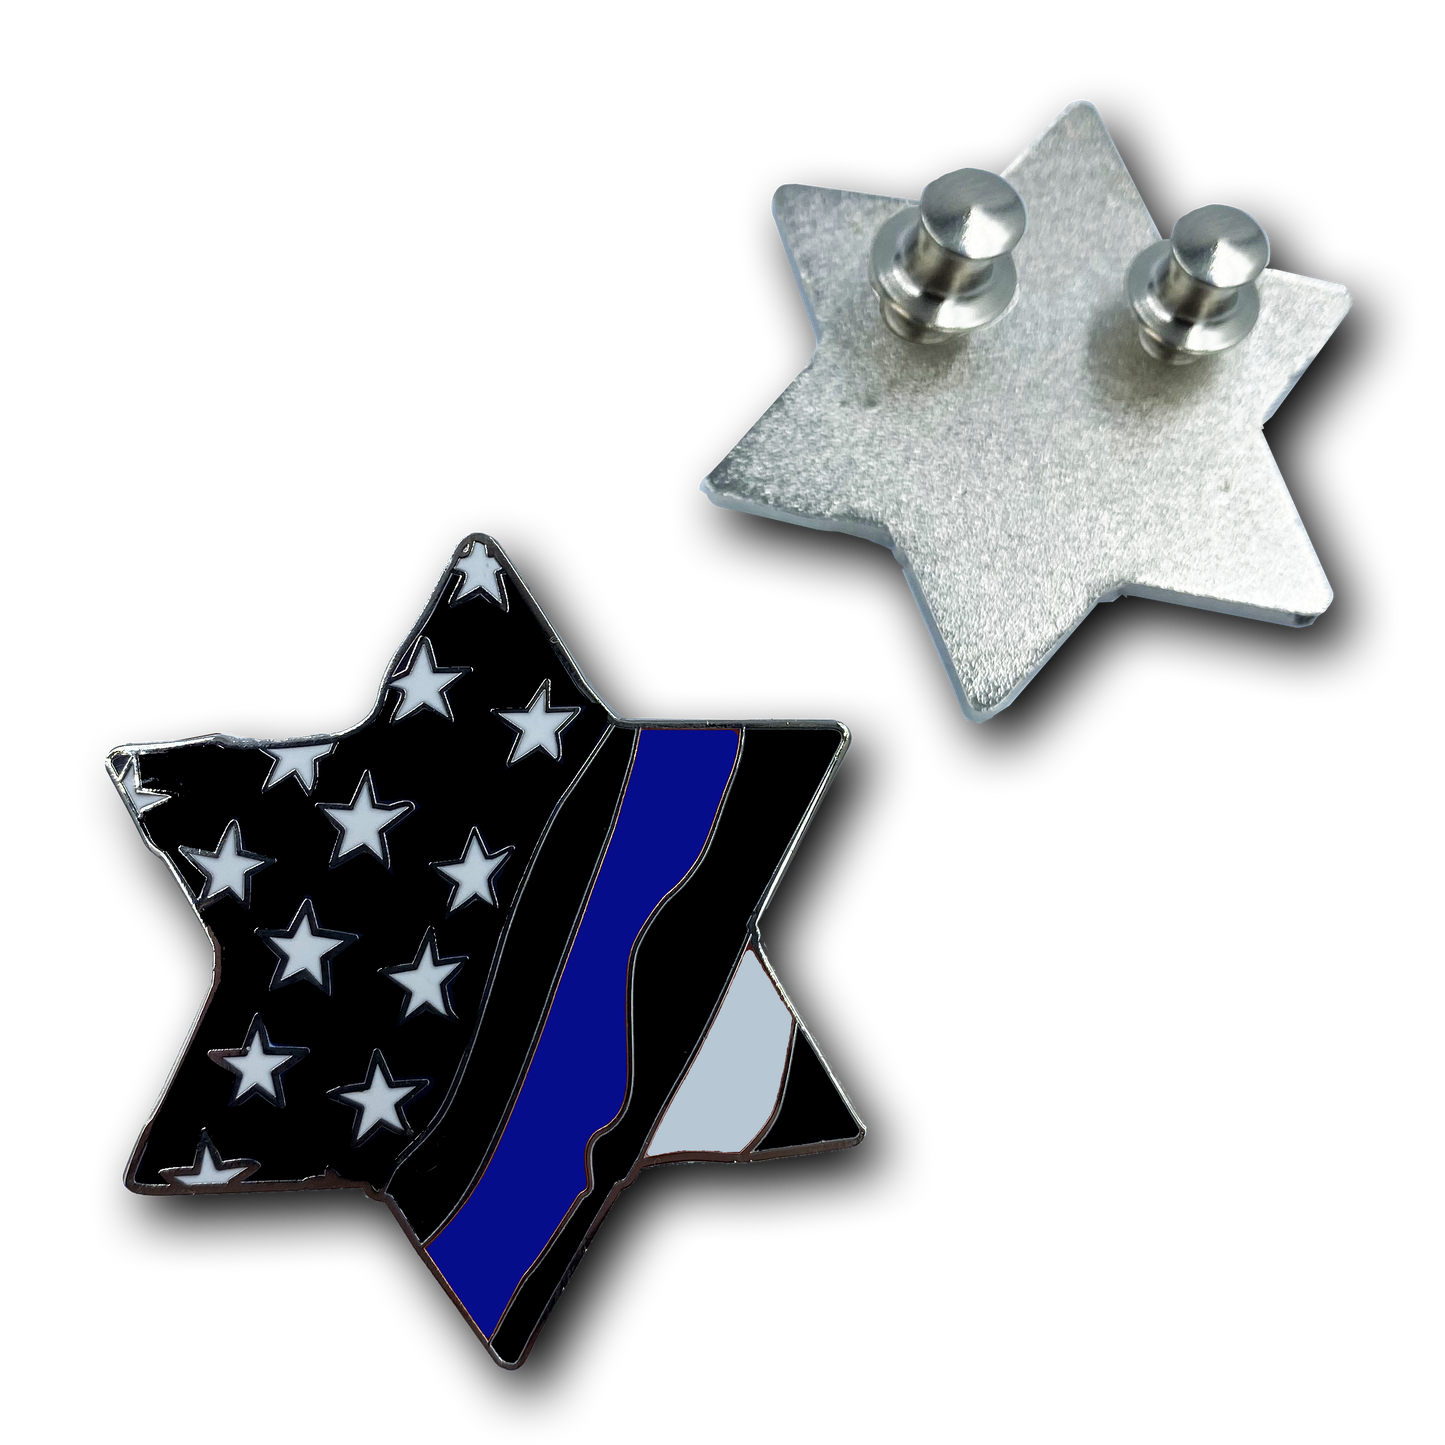 HH-020 Thin Blue Line Jewish Star of David Police American Flag U.S.A. Pin Cloisonné with deluxe clasps Israel